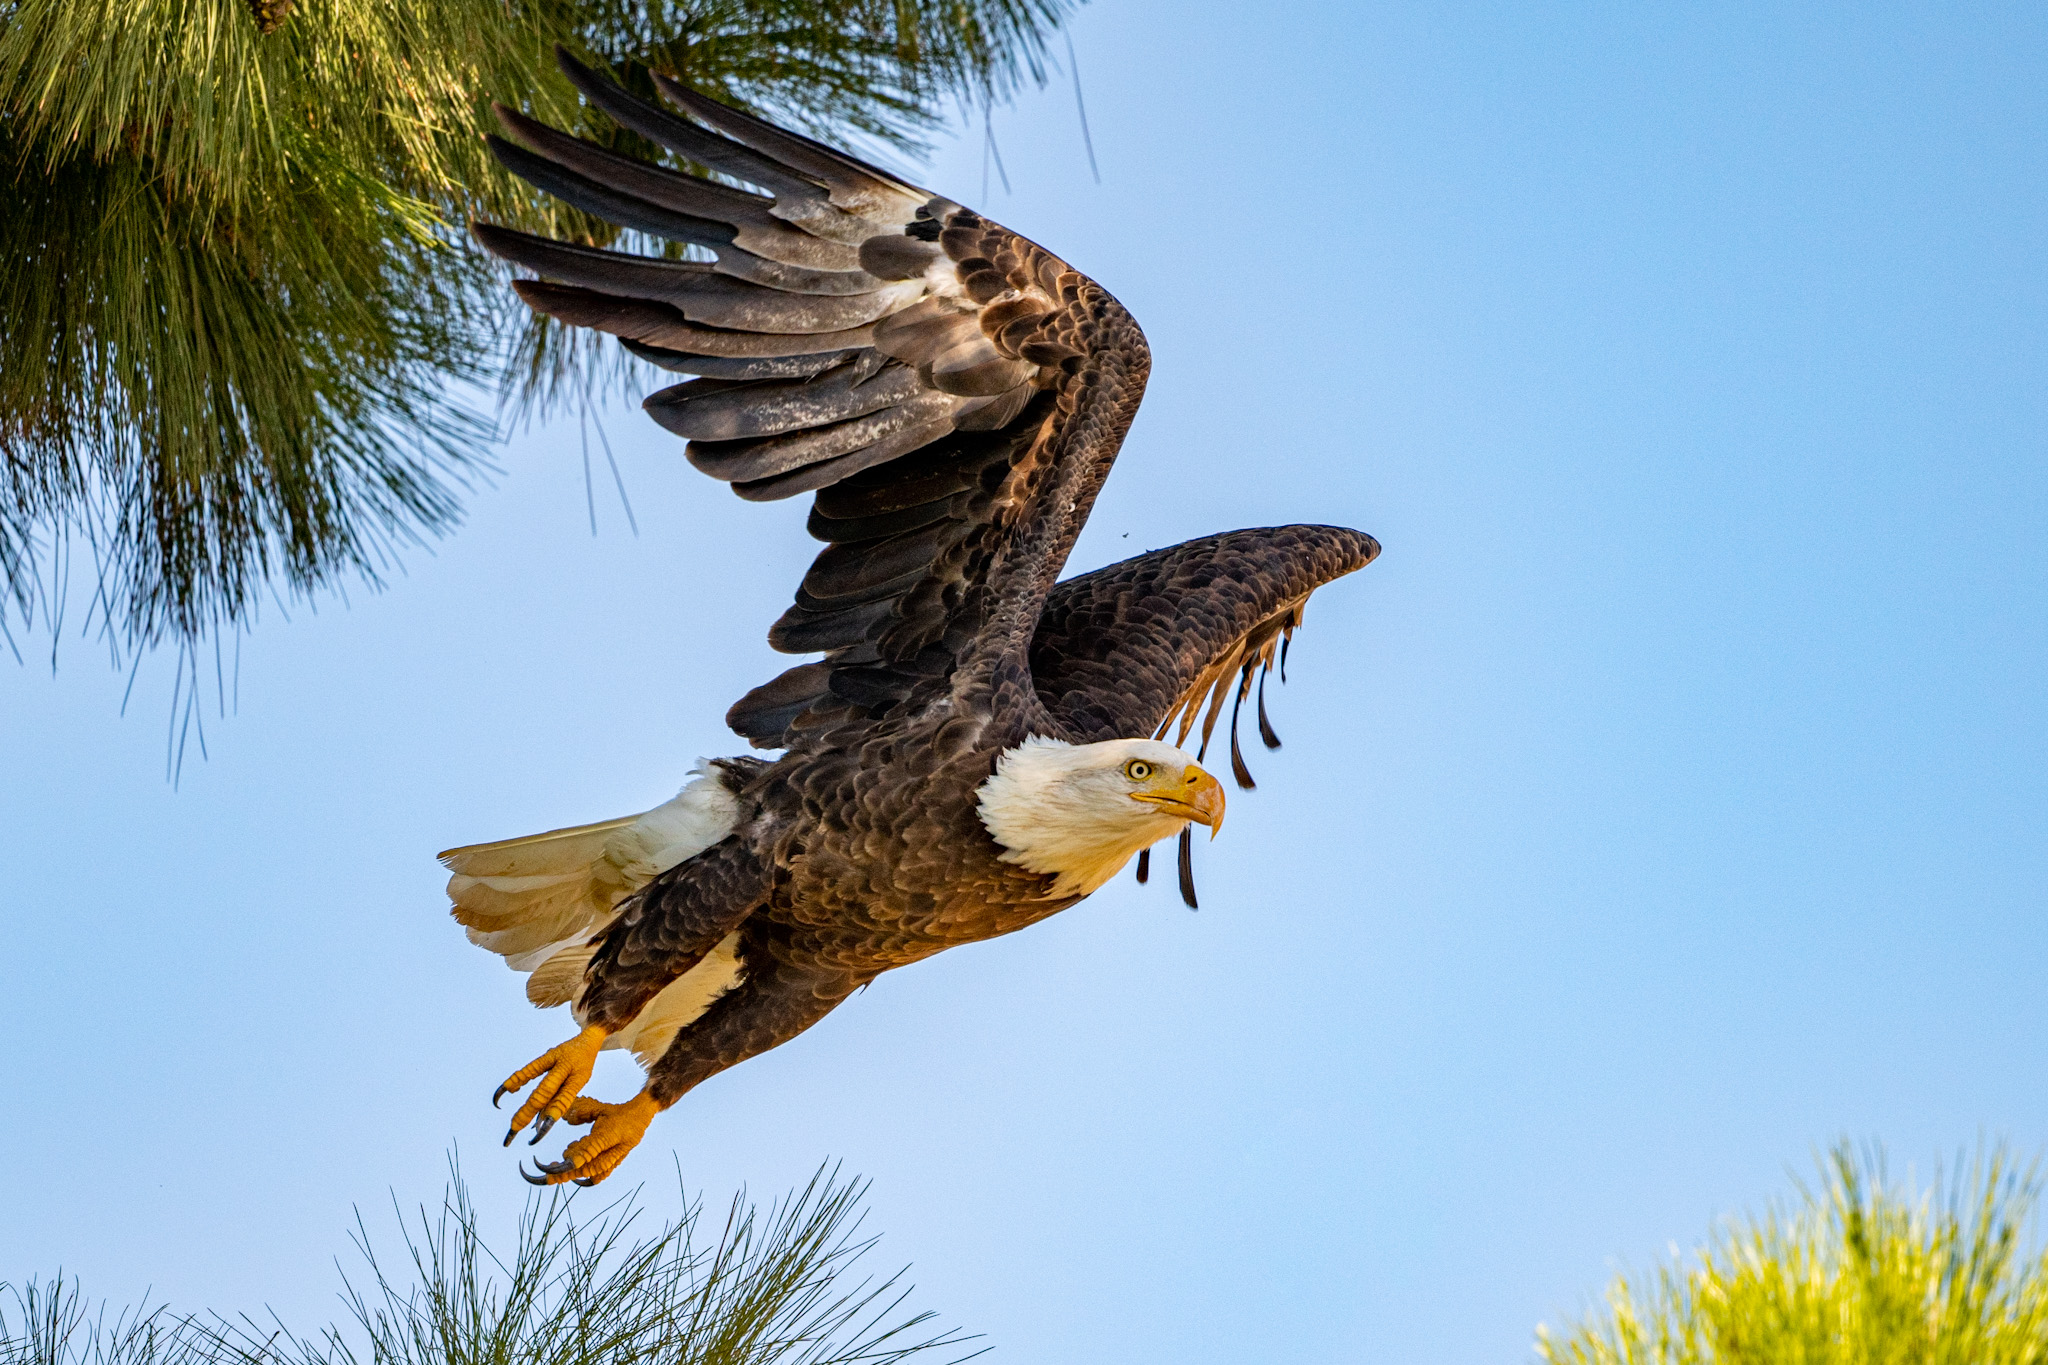 Photo by Douglas Coxon  |  A Bald Eagle takes to the skies from it’s pine tree perch